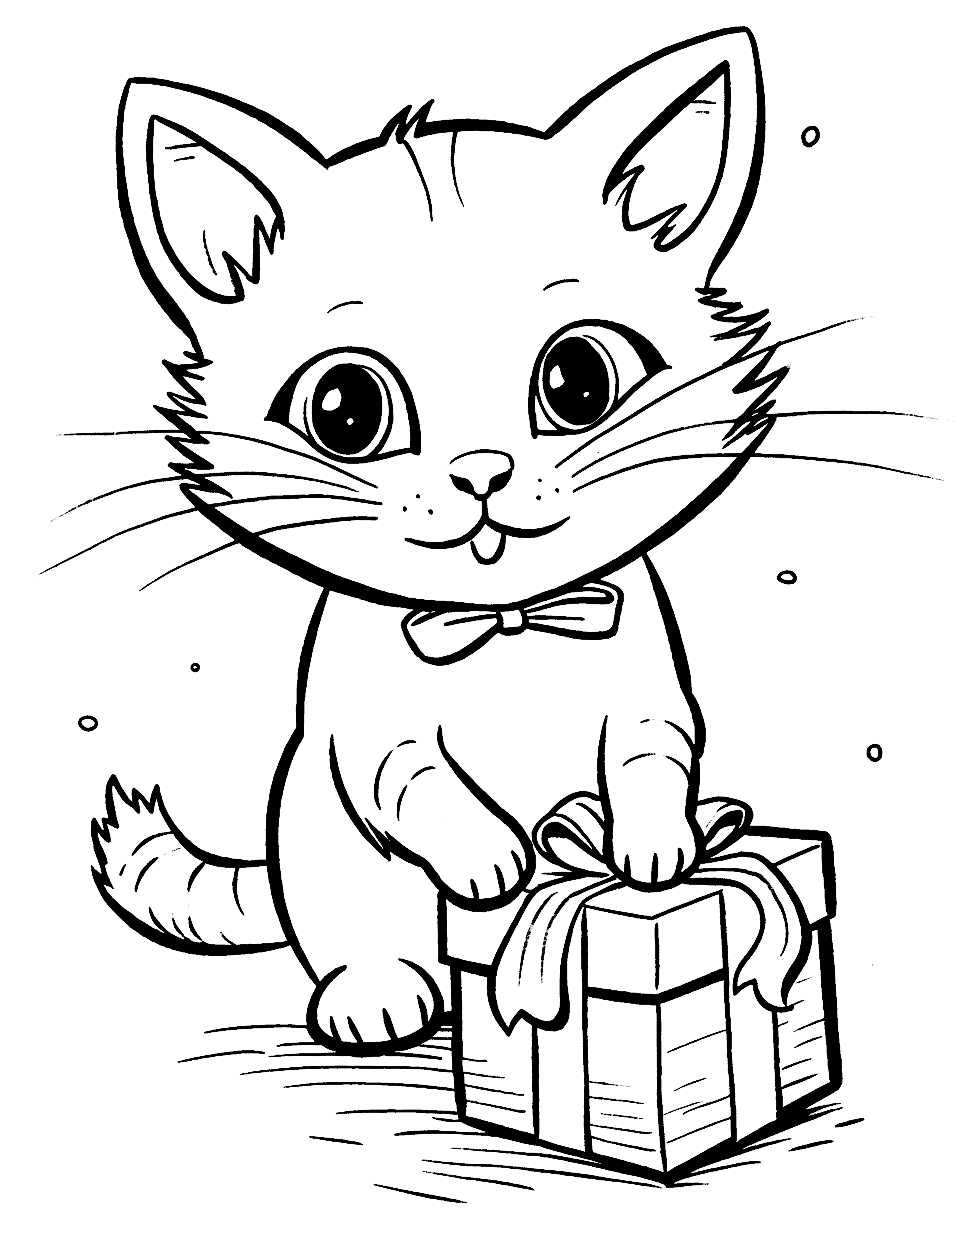 Birthday Cat Opening a Present Coloring Page - A happy cat opening a birthday present with excitement and anticipation.